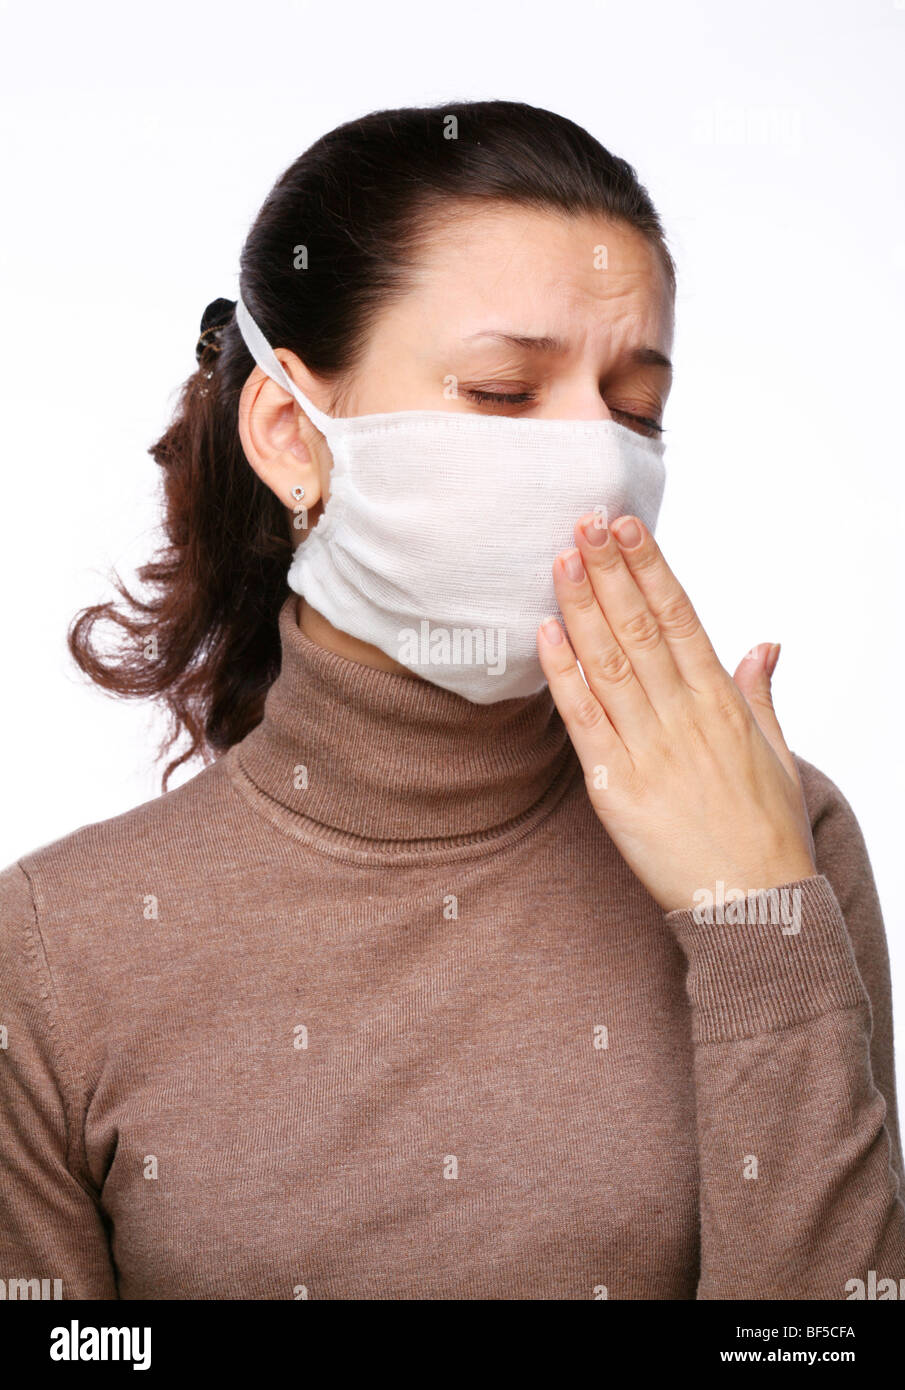 Coughing woman in a medical mask on a white background Stock Photo